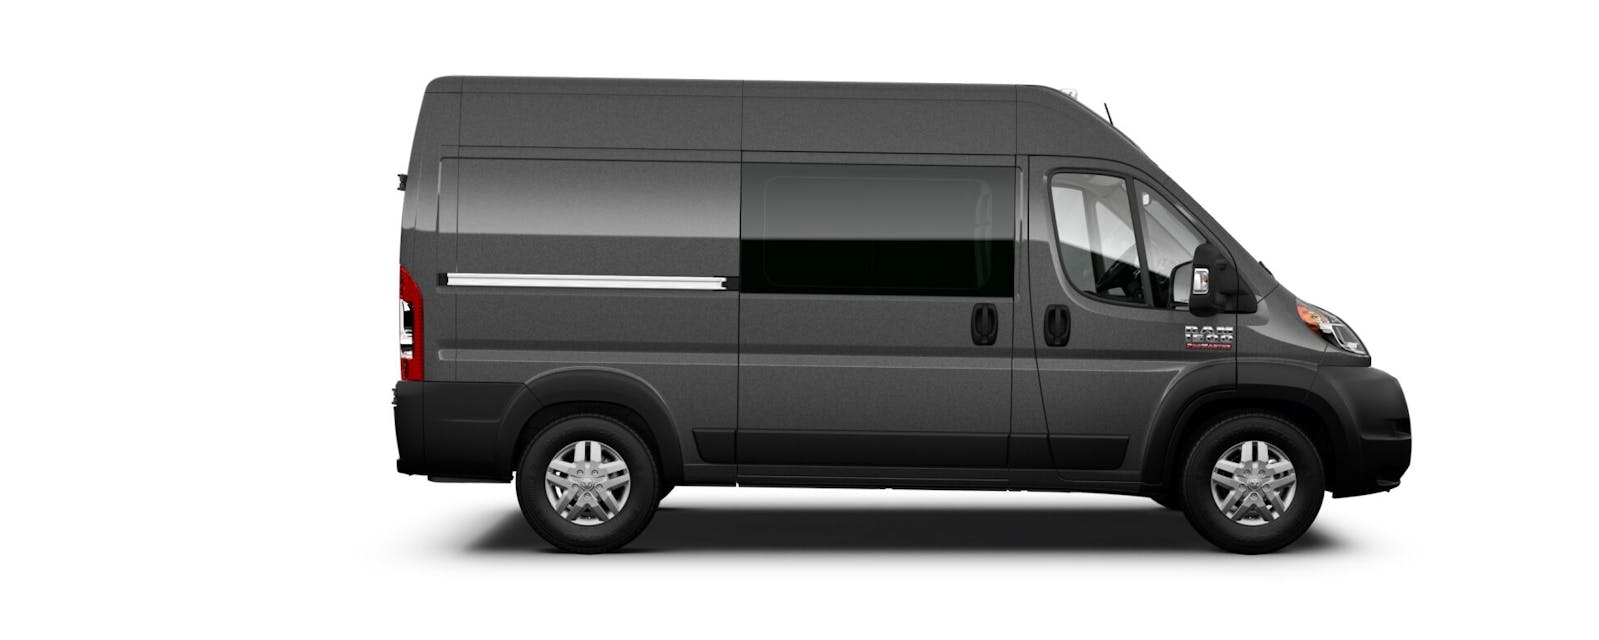 2022 Thor Scope Rize Class B RV RAM ProMaster® 1500 Charcoal Exterior key feature